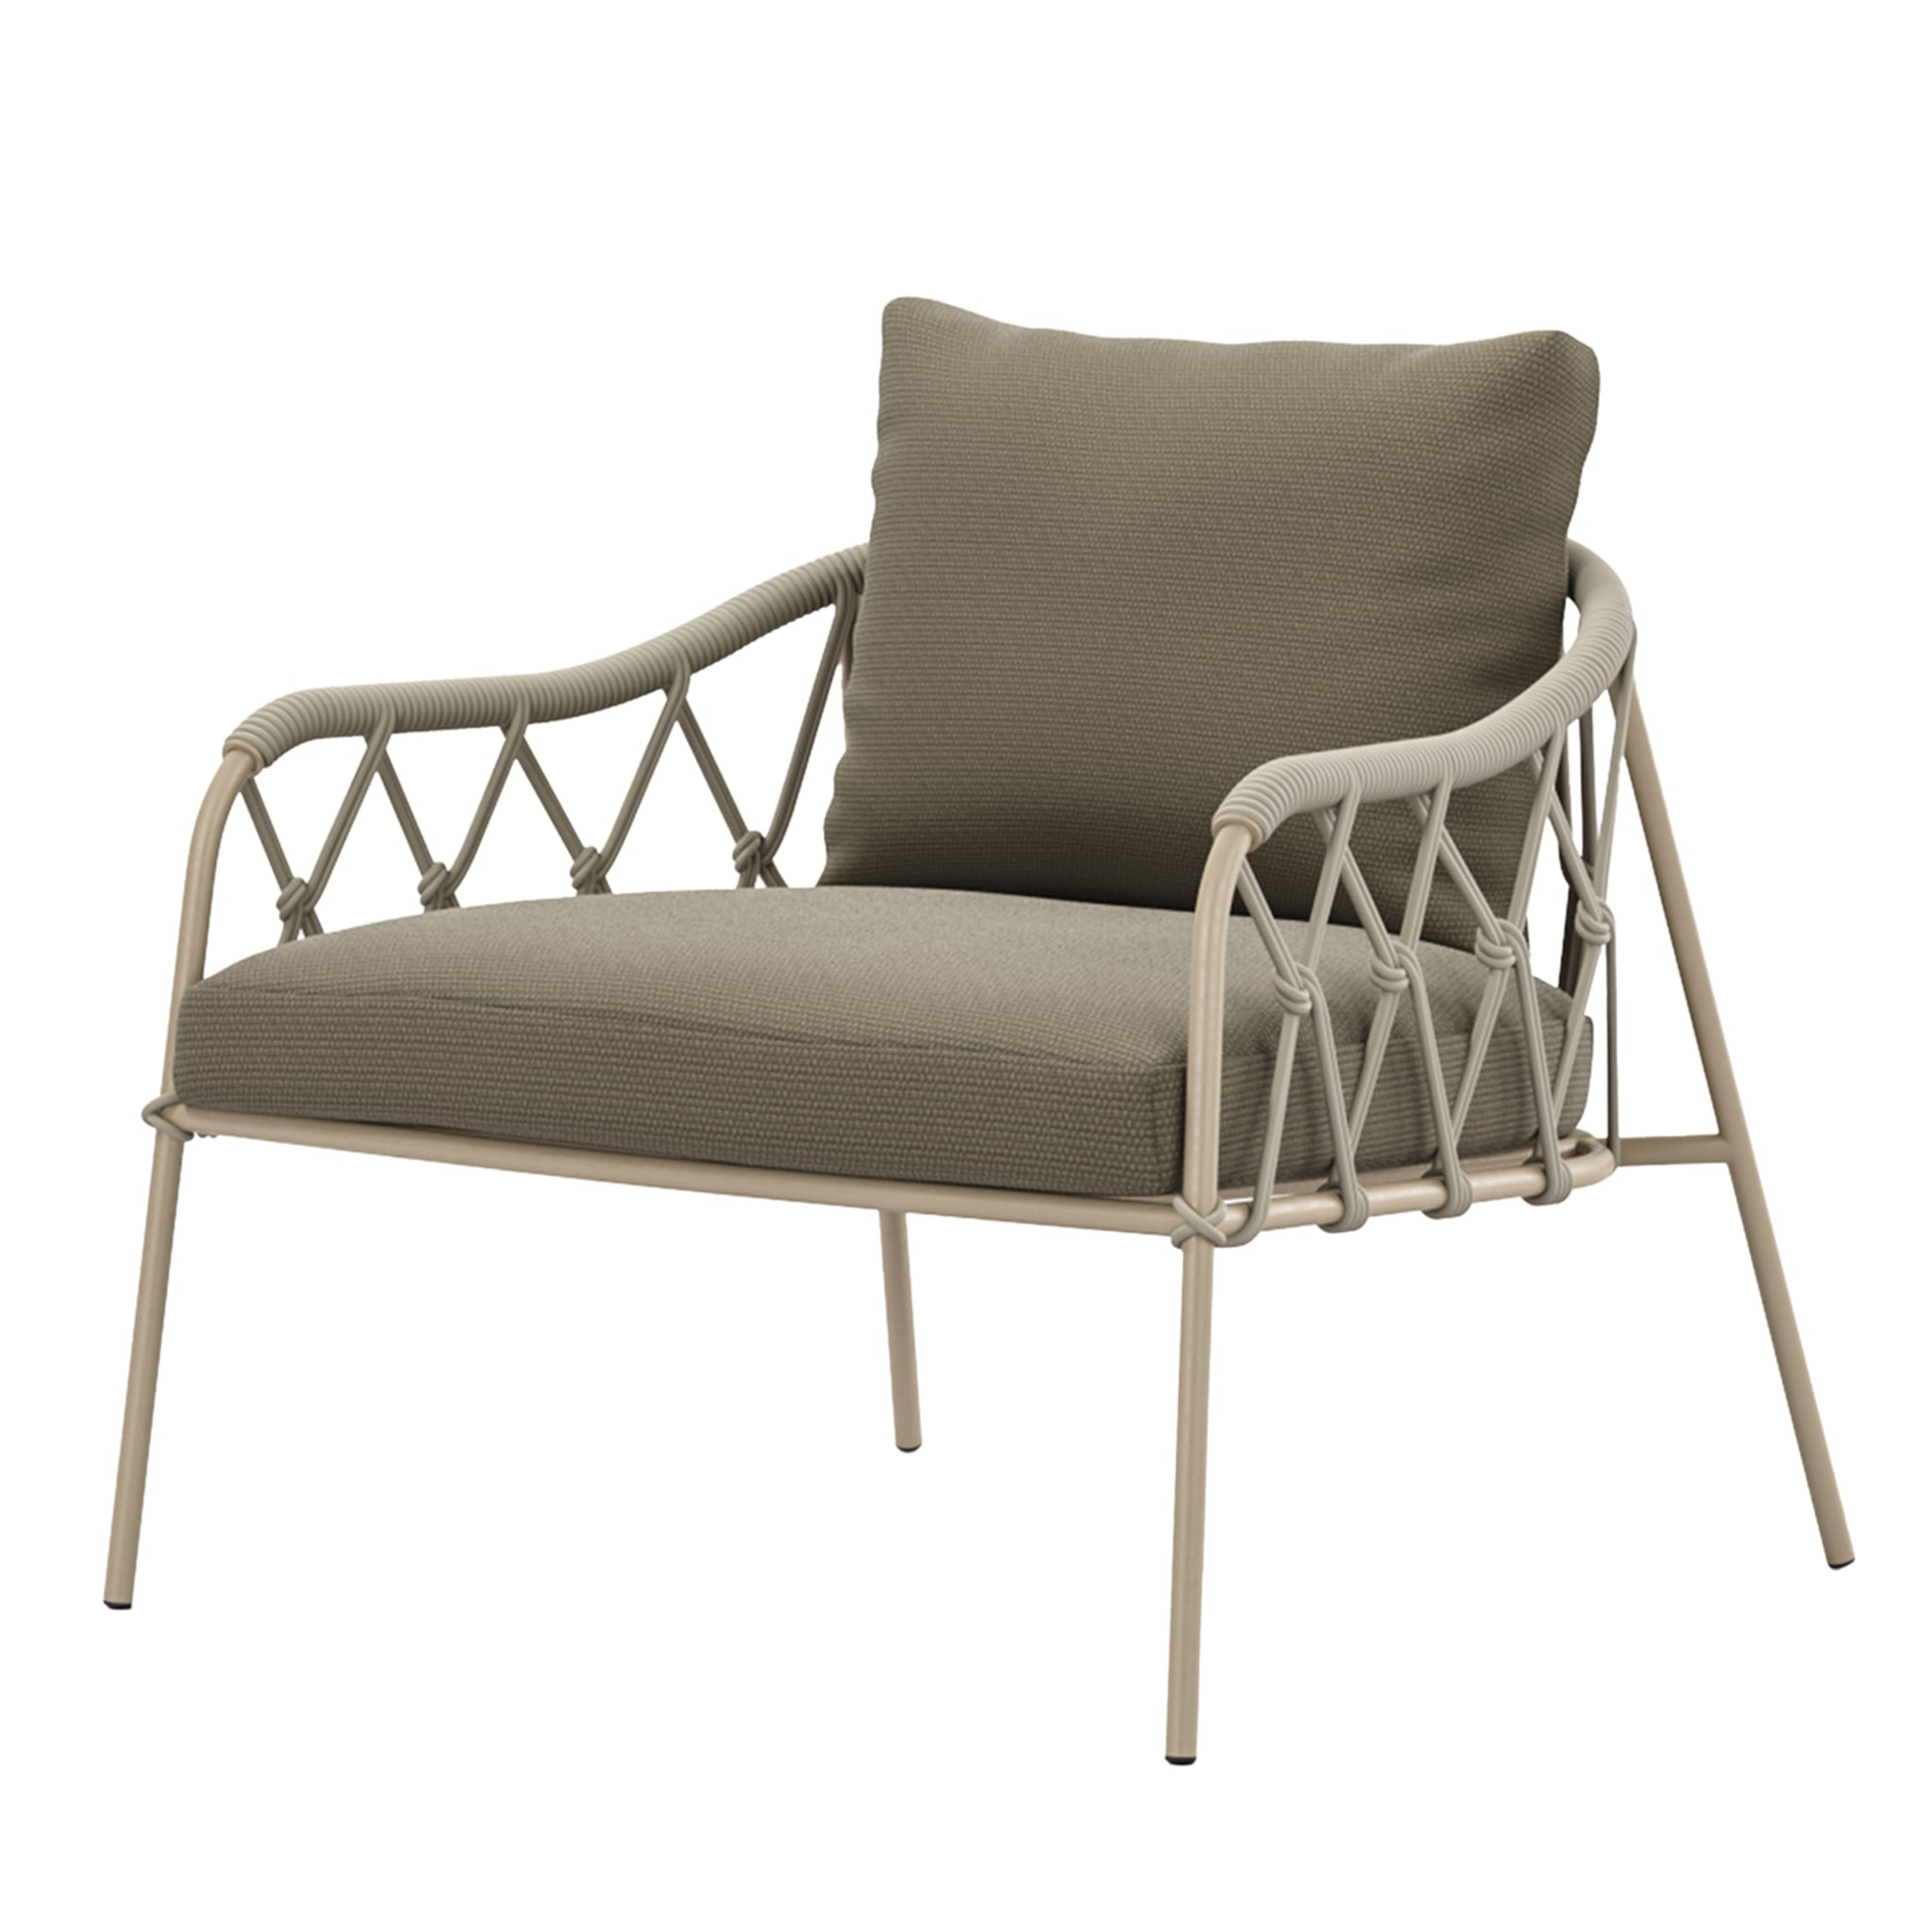 Scala Large Beige Outdoor Armchair by Marco Piva - Main view